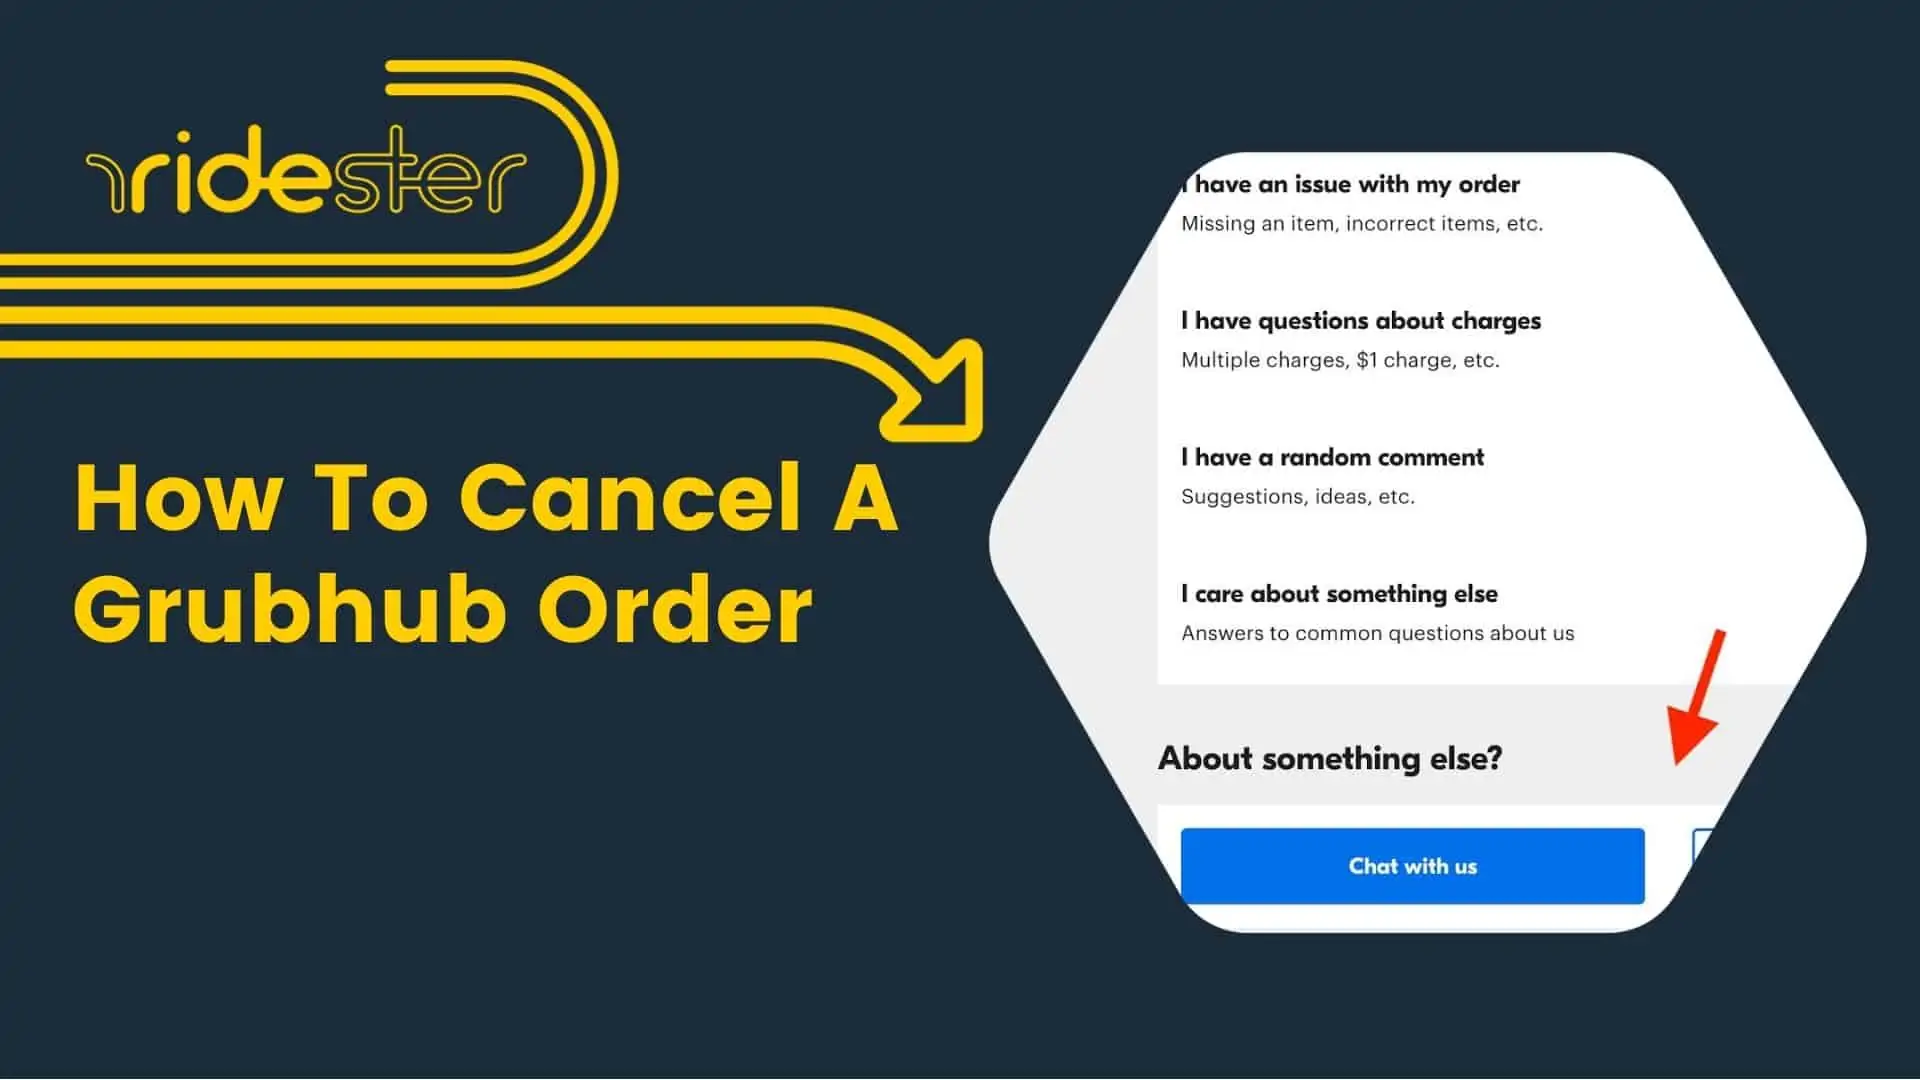 header graphic with text "how to cancel grubhub order" on the image